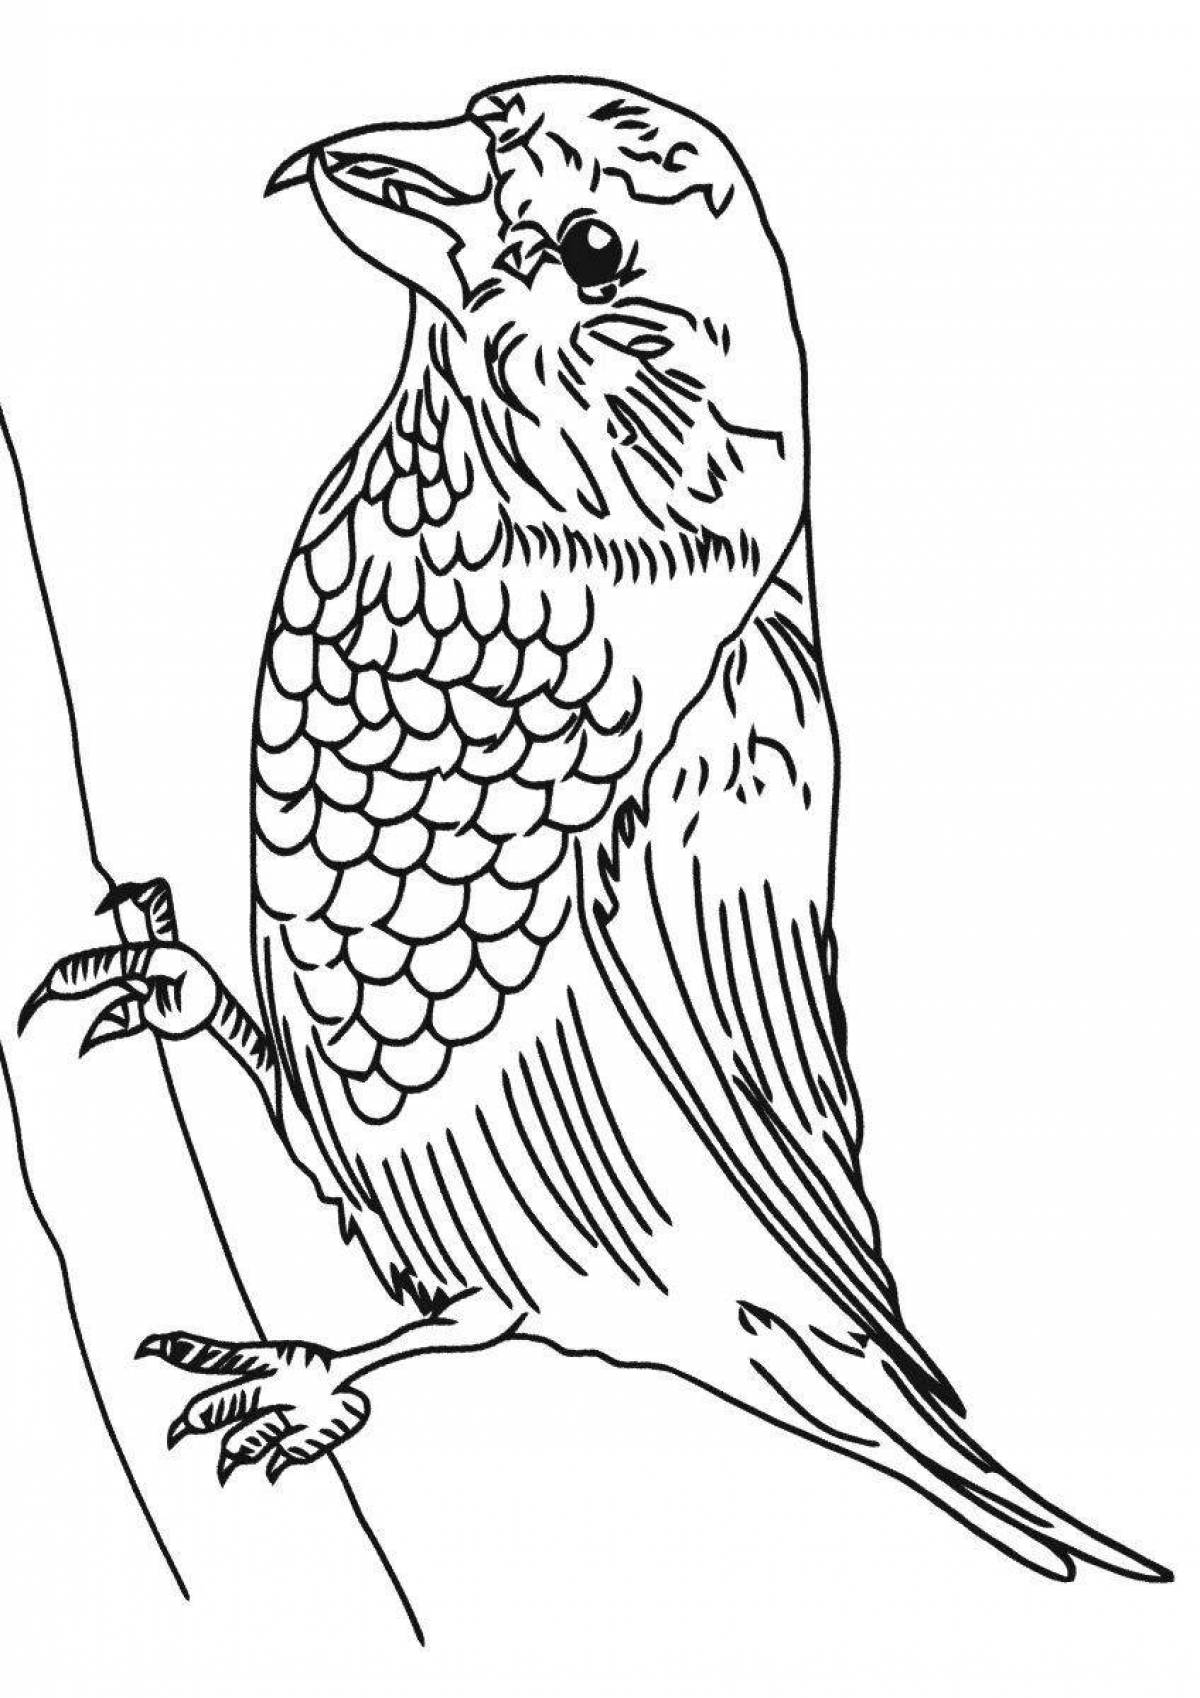 Fun crossbill coloring for kids